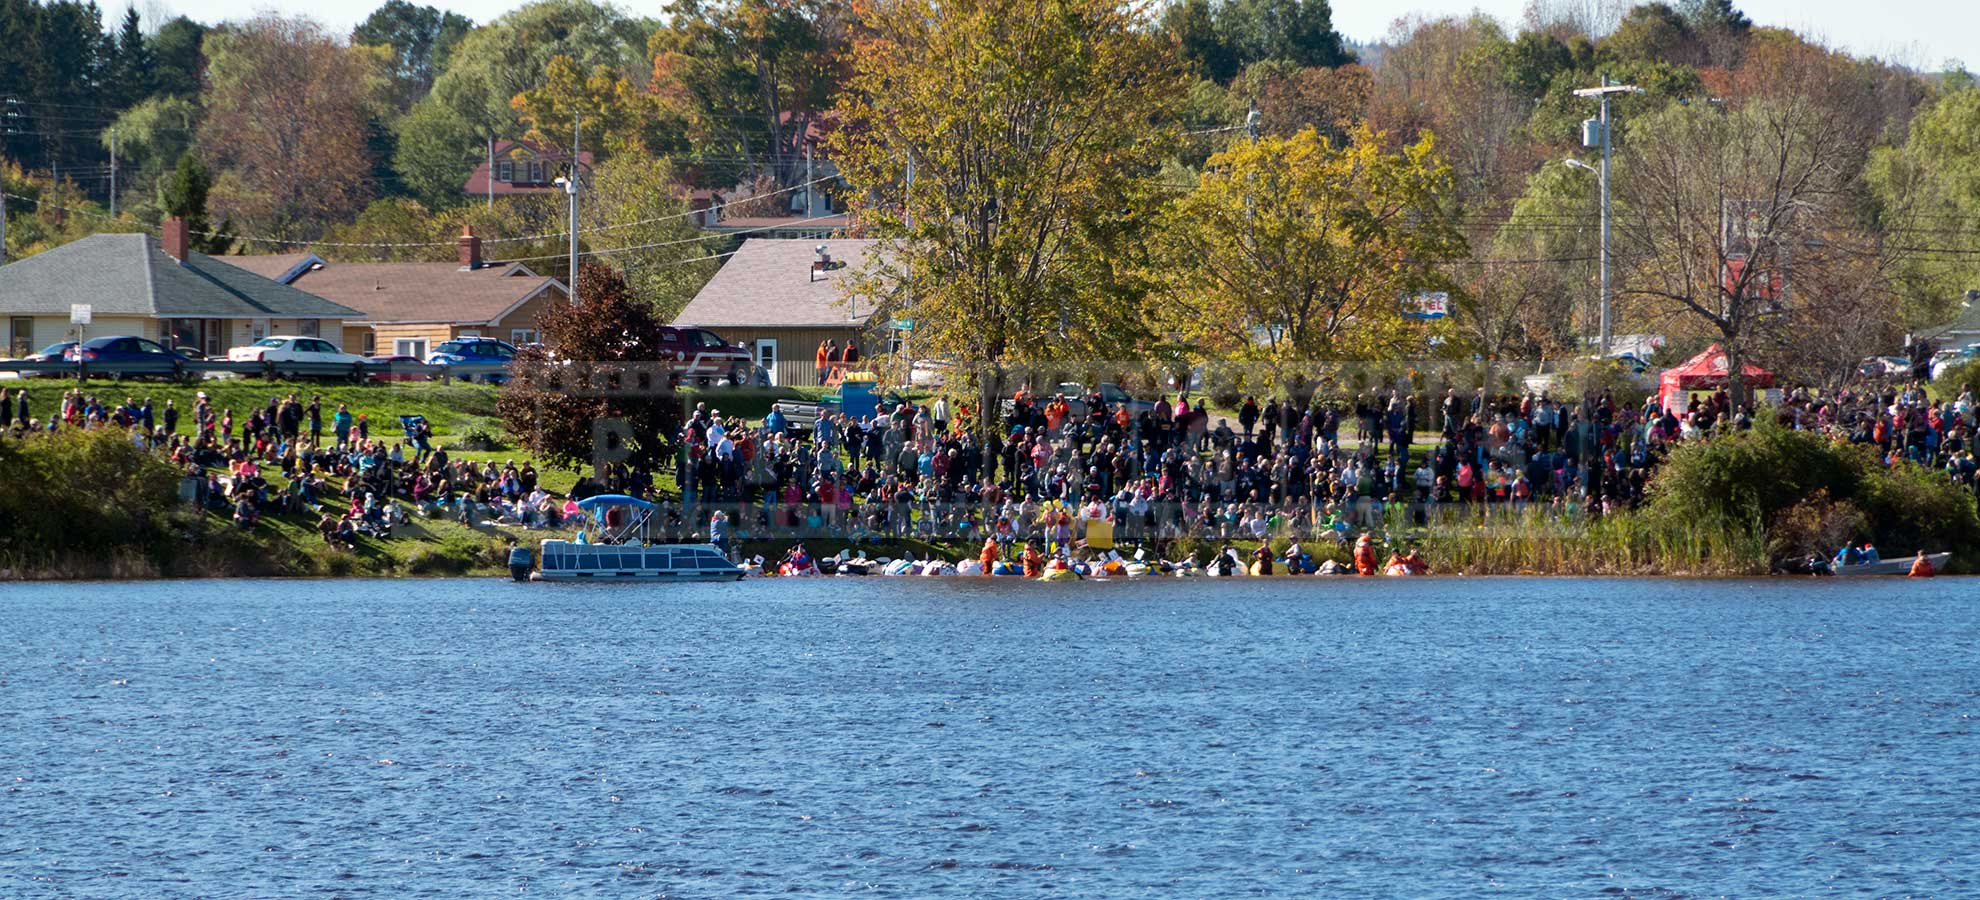 pumpkin boats lined up at the start of the race in Windsor, Nova Scotia